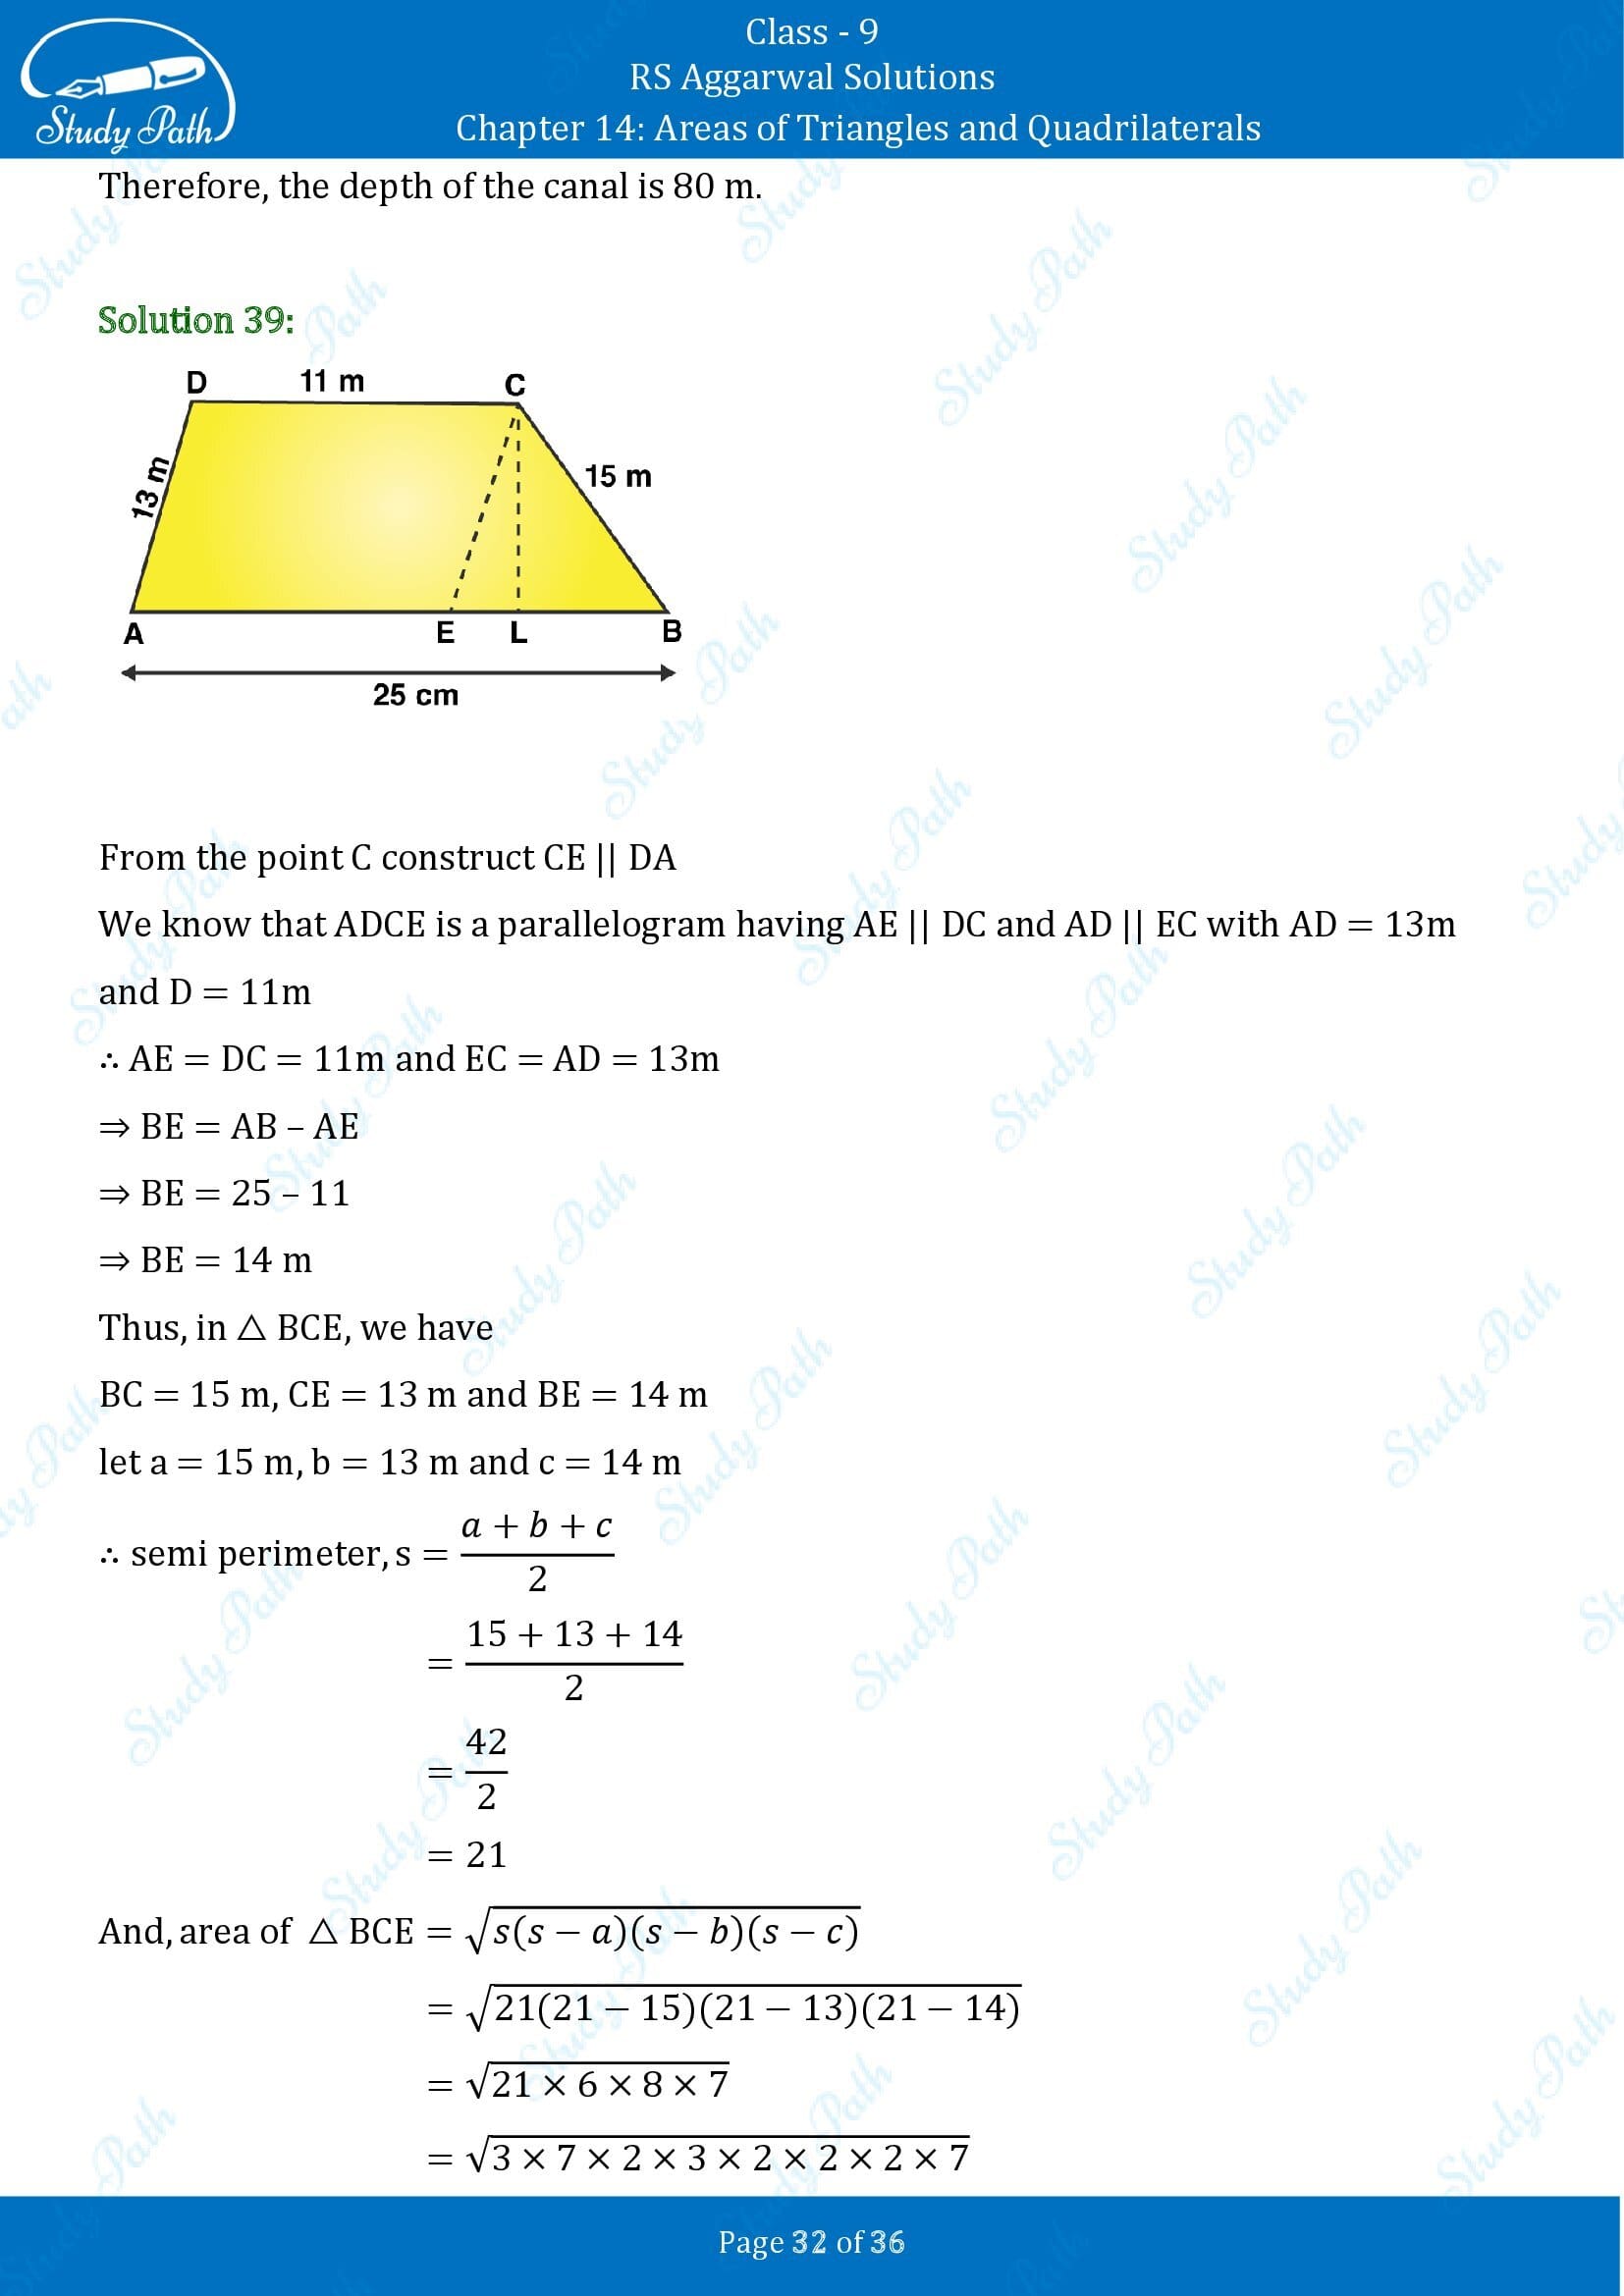 RS Aggarwal Solutions Class 9 Chapter 14 Areas of Triangles and Quadrilaterals Exercise 14 00032